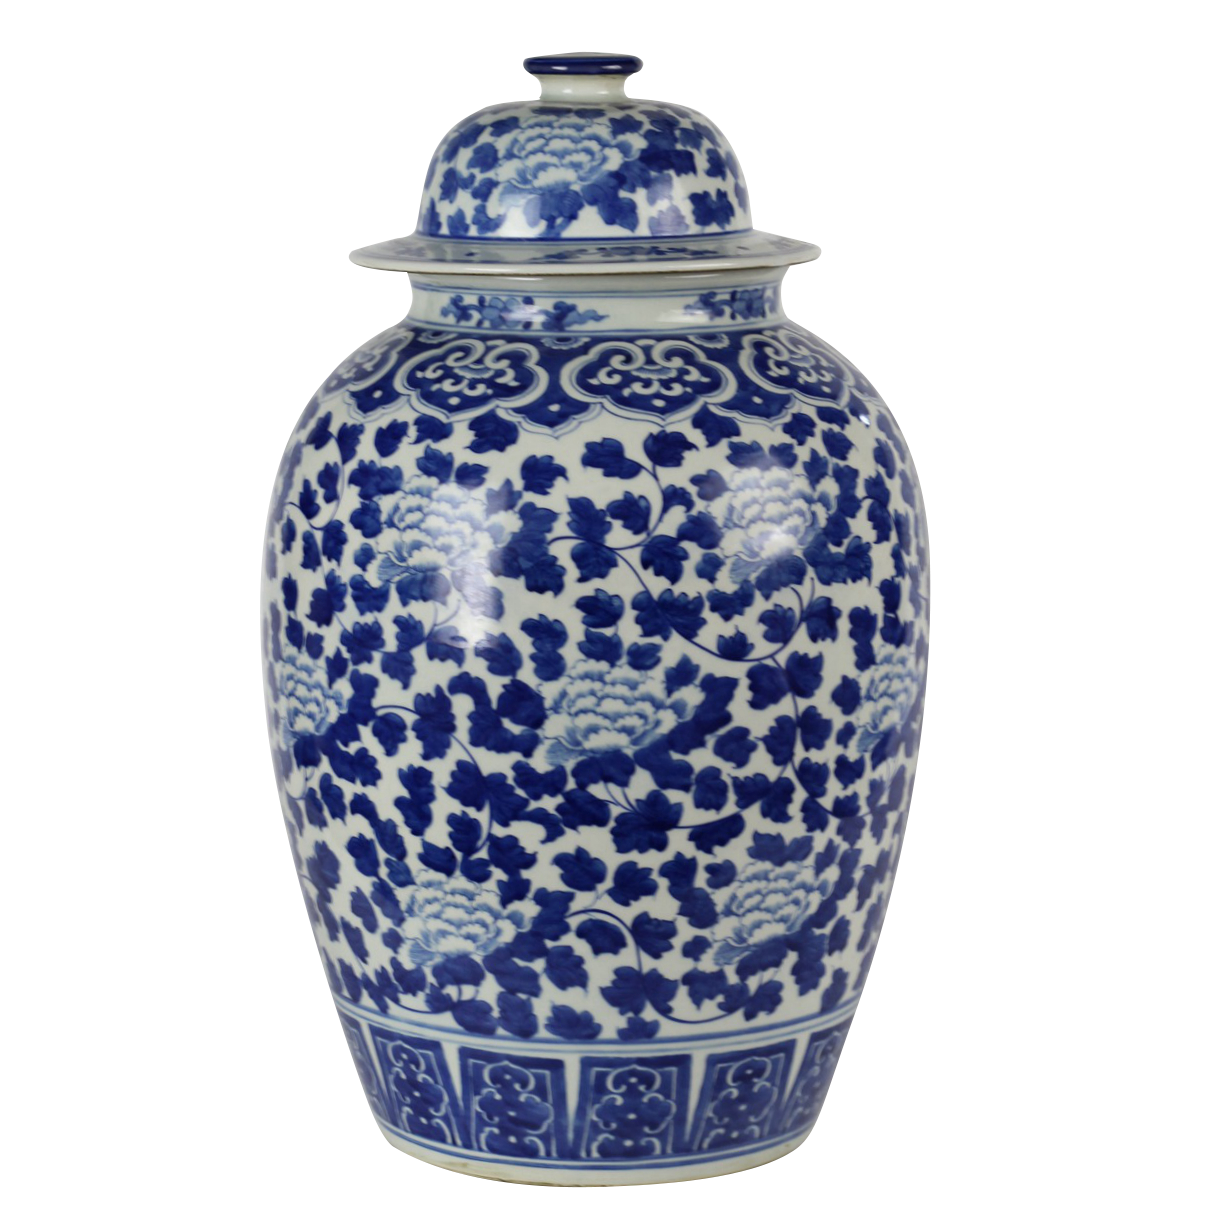 White and blue porcelain ginger jar with lid